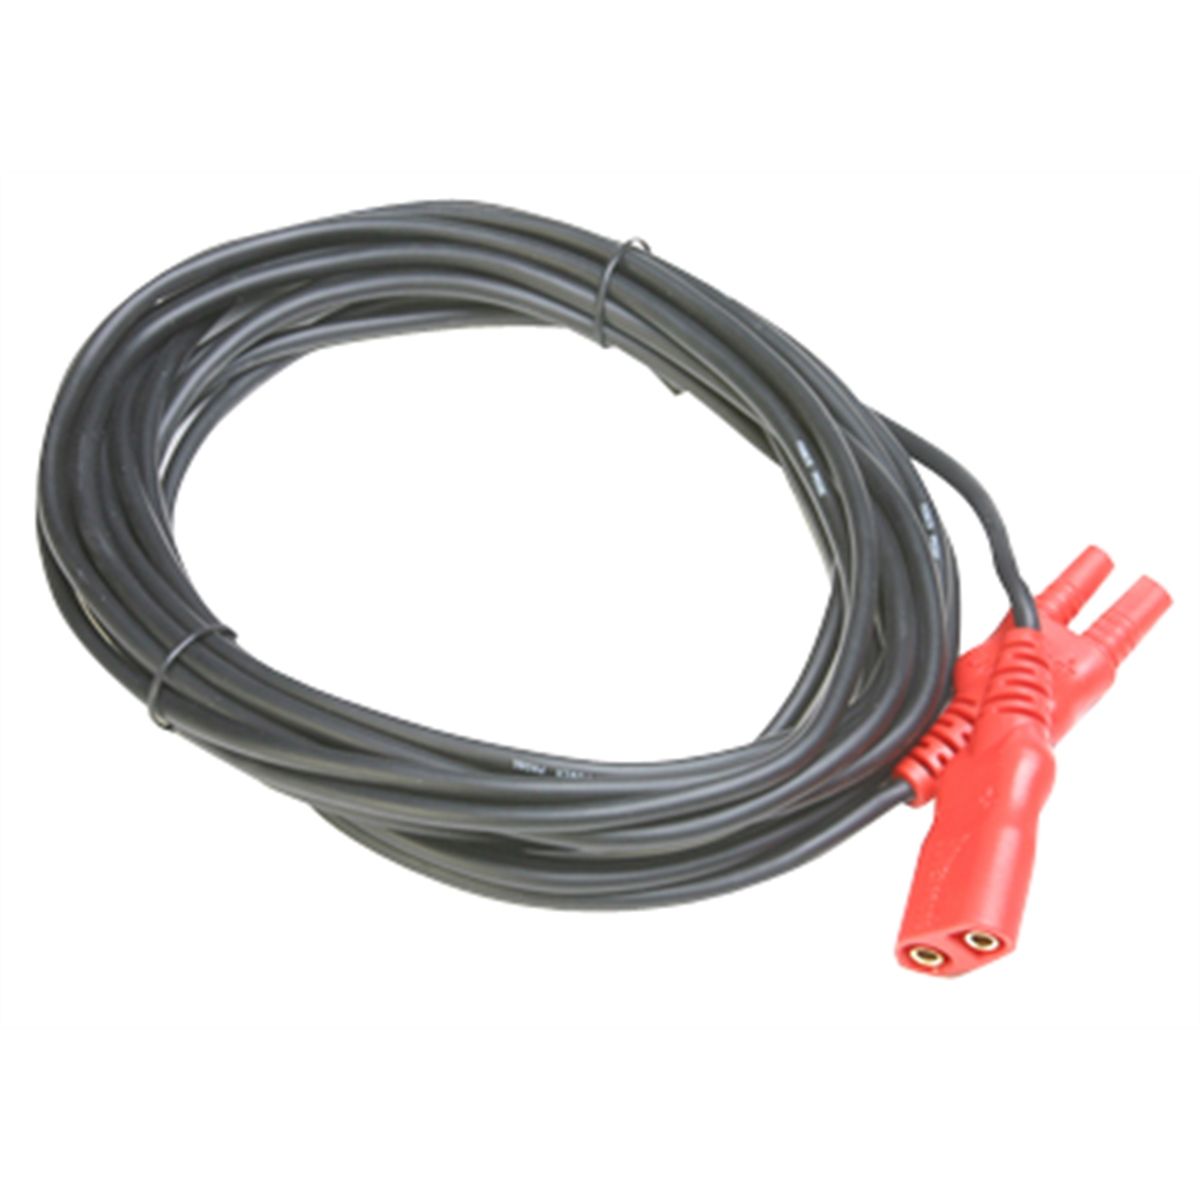 Power Probe III 20 Ft Extension Cable